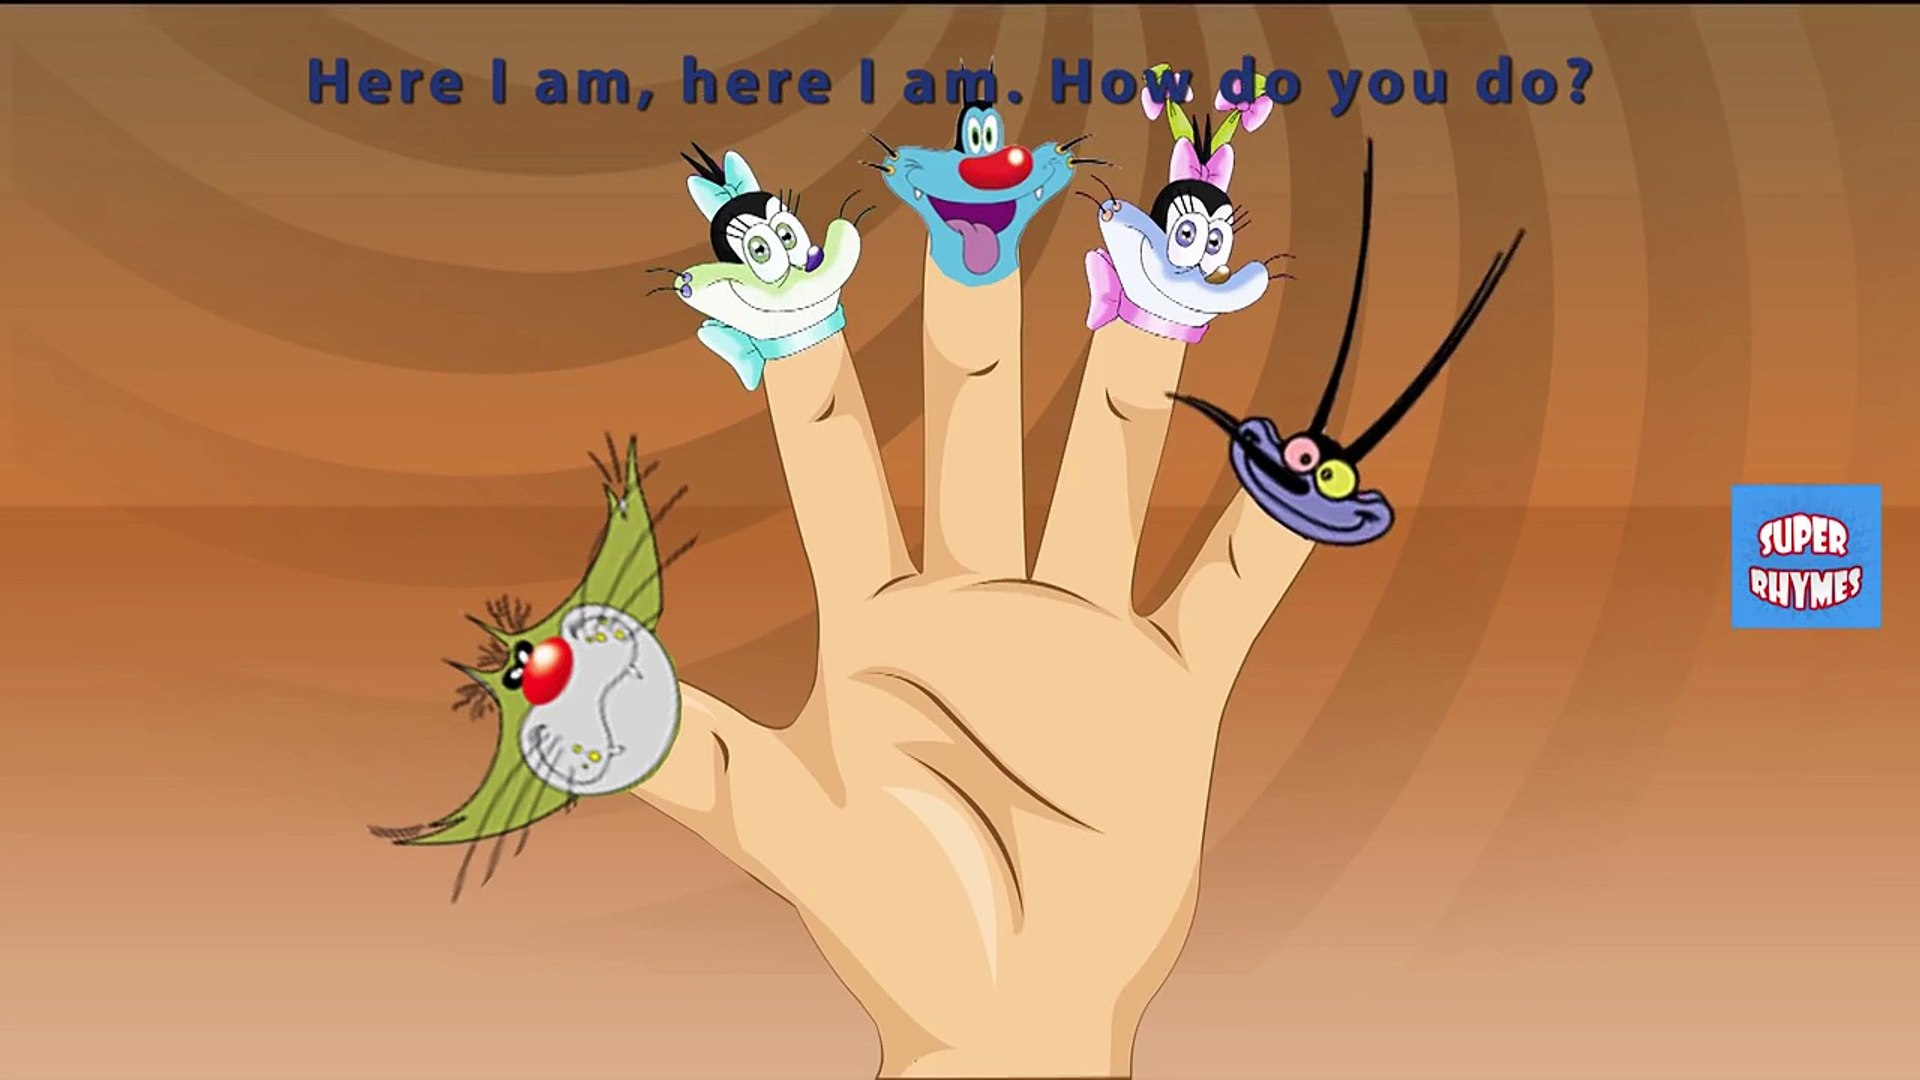 Oggy and the Cockroaches Finger Family Nursery Rhymes Lyrics - Dailymotion  Video